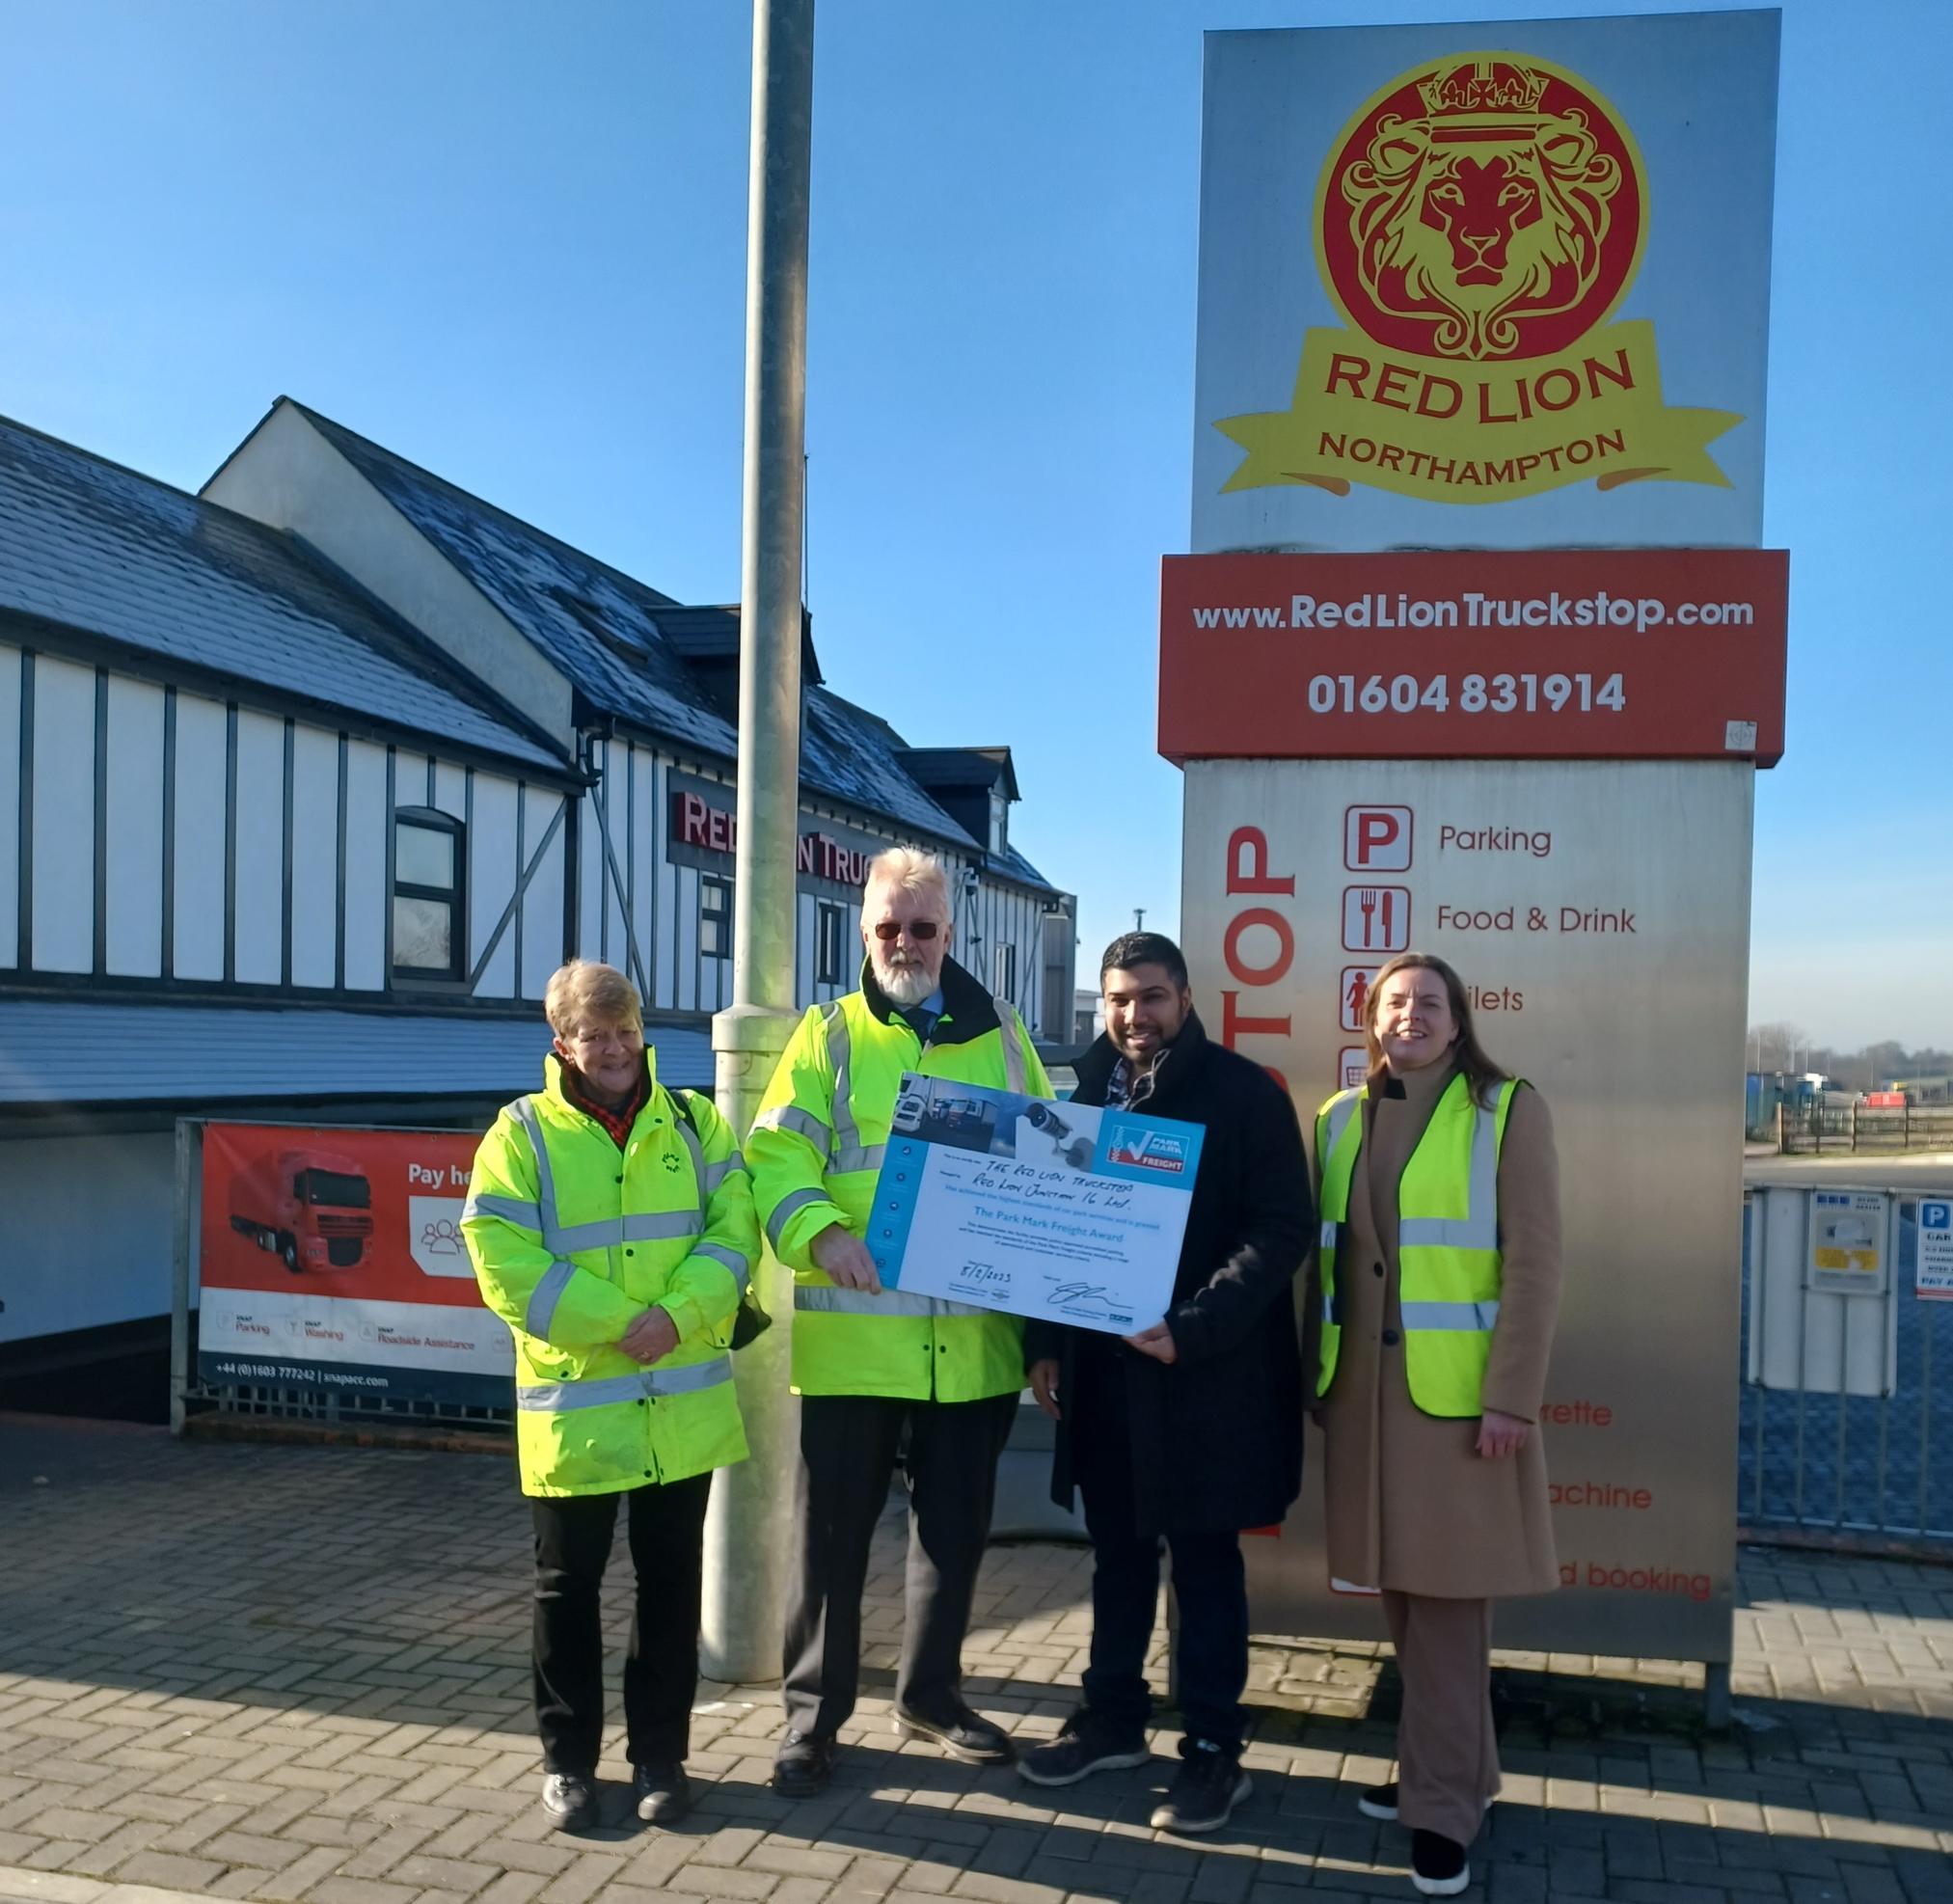 Sharon Henley, police assessor, Northamptonshire Police, Ali Sadrudin, Red Lion Truck Stop, Peter Gravells, BPA area manager, and Sara Fisher, BPA head of operations